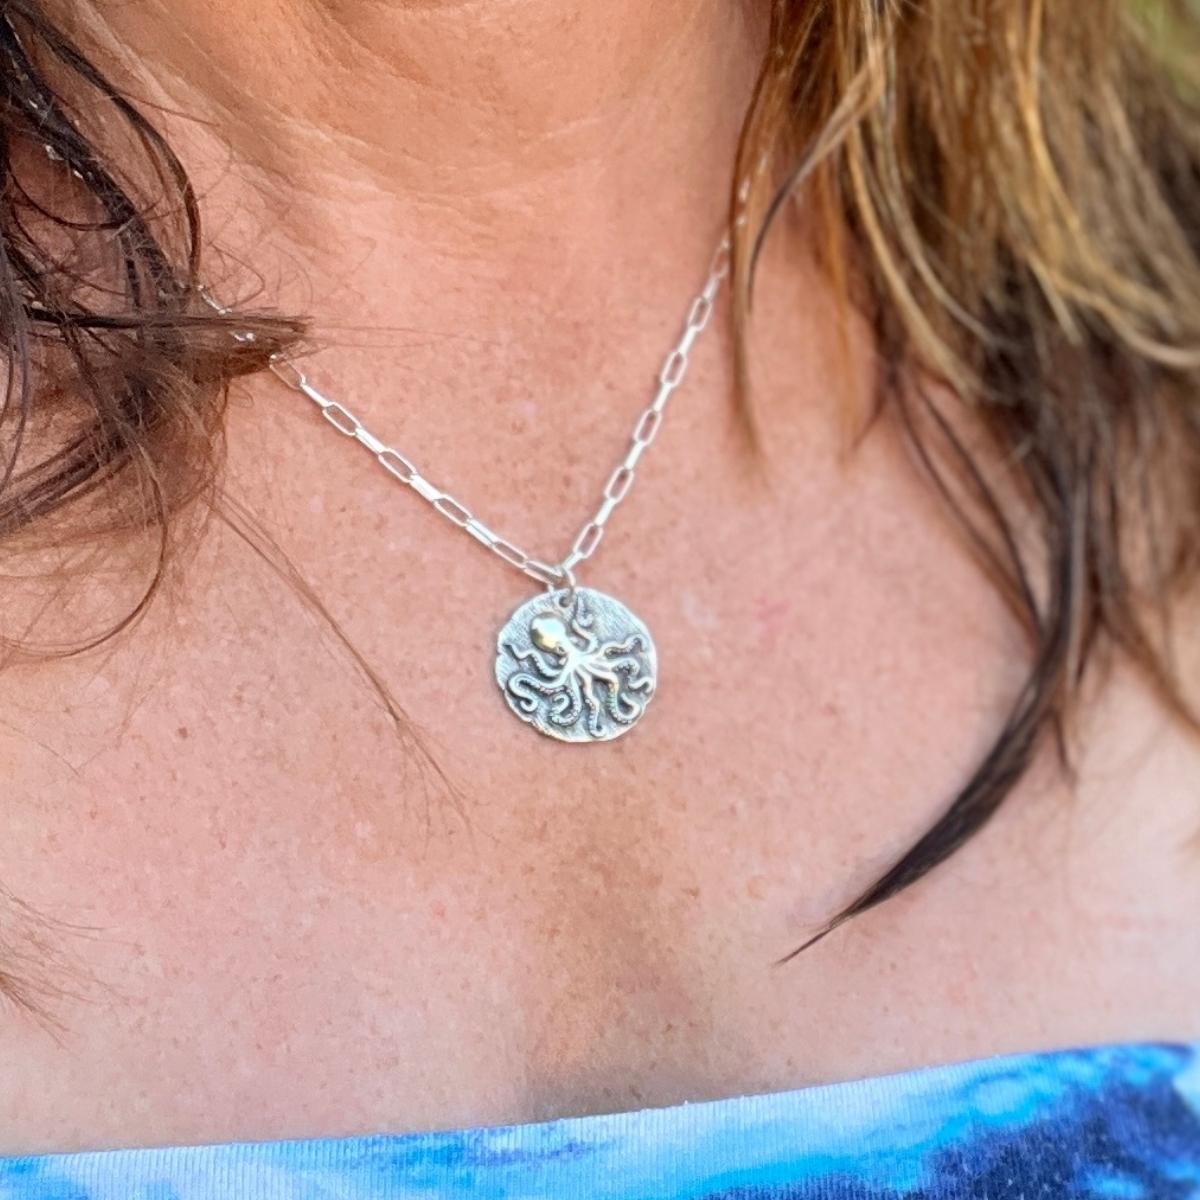 As you adorn yourself with this "Champion of Change: Octopus Necklace", let it symbolize your own journey of transformation, a reminder that just like the octopus, you too are a champion of change in the tapestry of life.